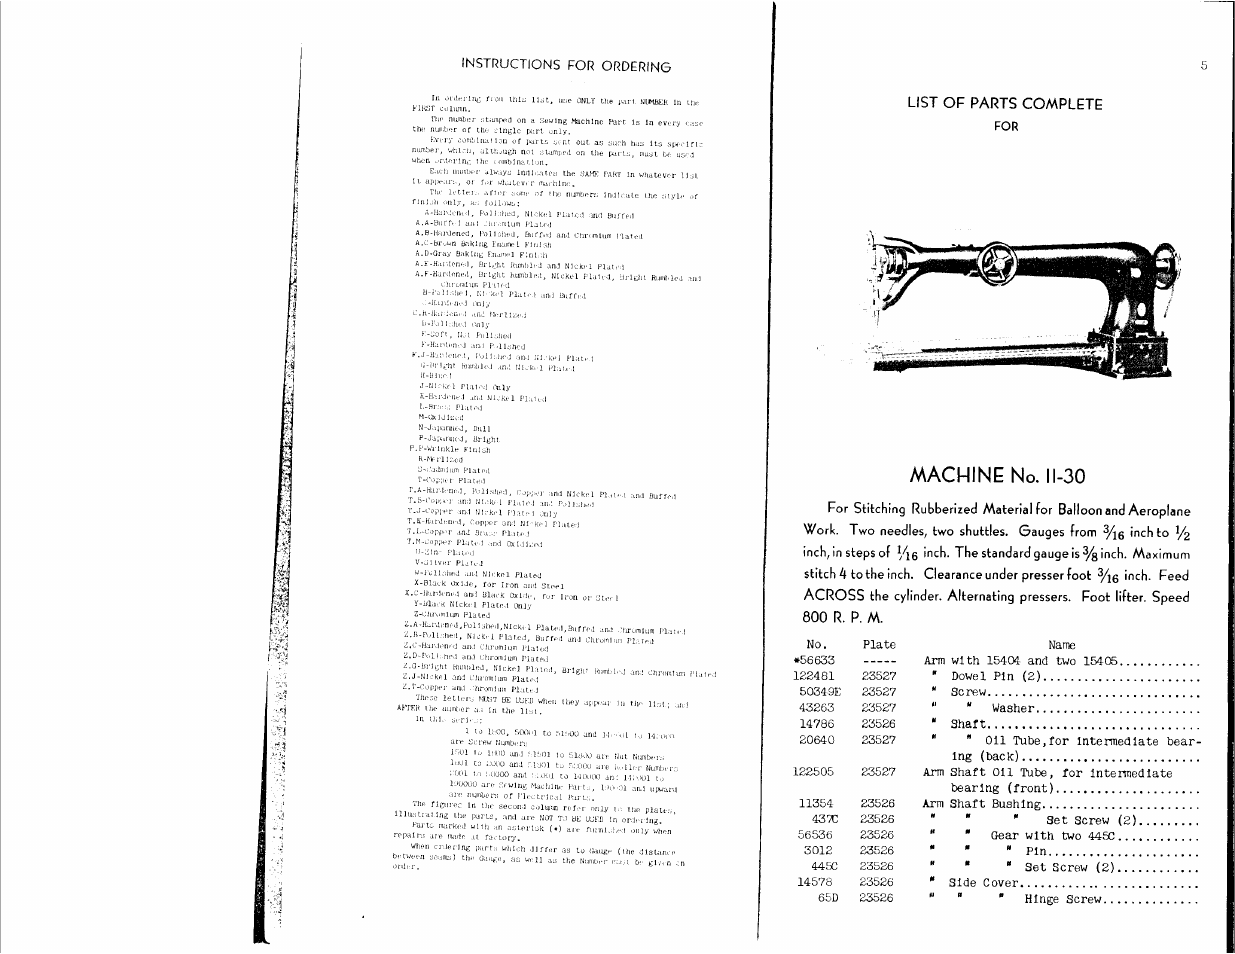 Machine no. 11-30, Instructions for ordering, П flared | SINGER 11-30 User Manual | Page 3 / 19